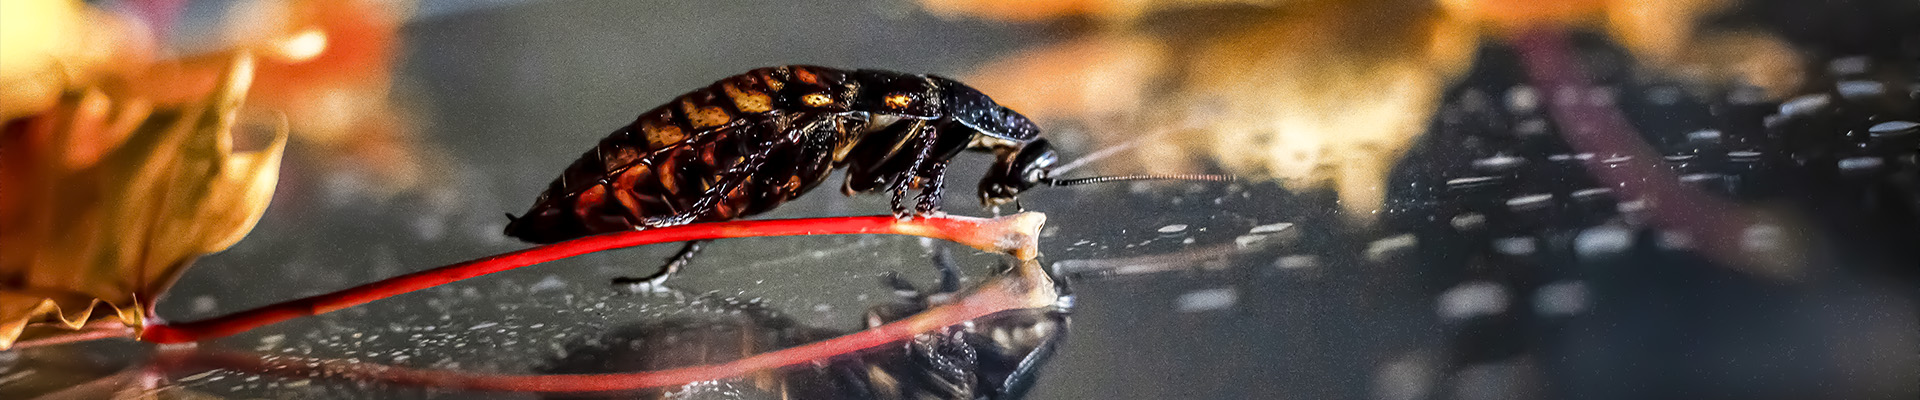 Cockroaches Page Header